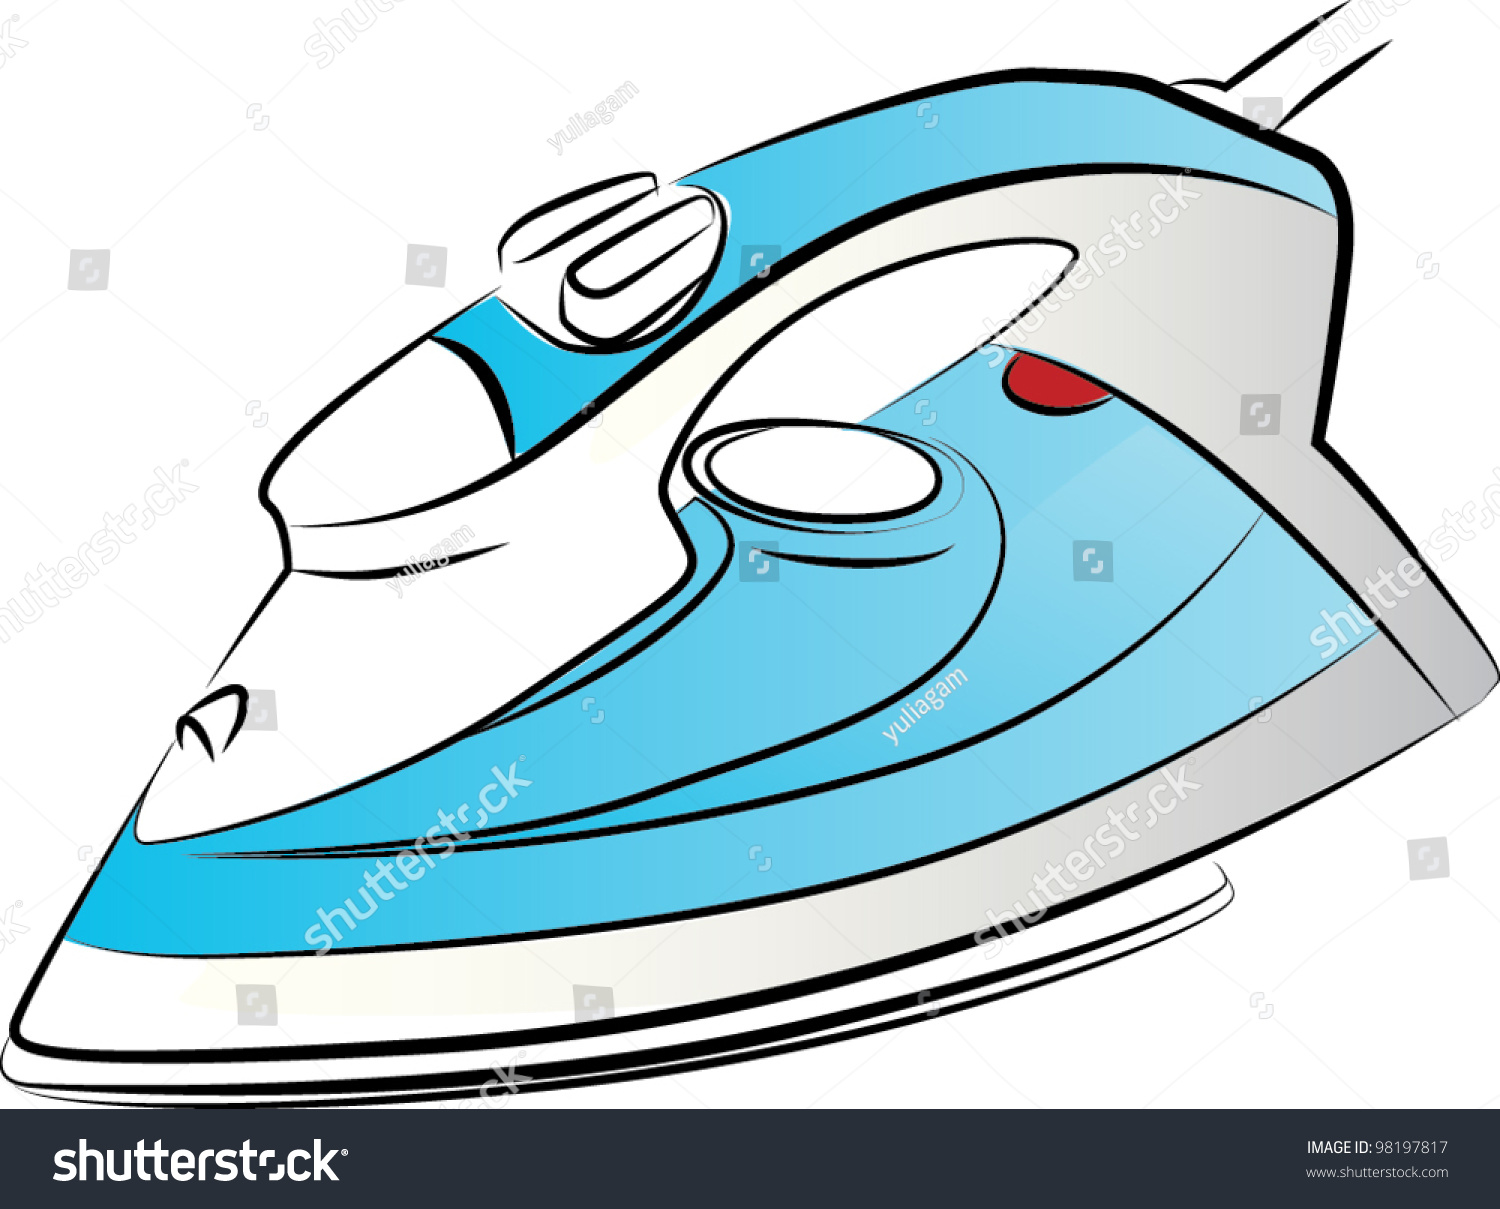 Drawing Of The Blue Iron, Vector - 98197817 : Shutterstock